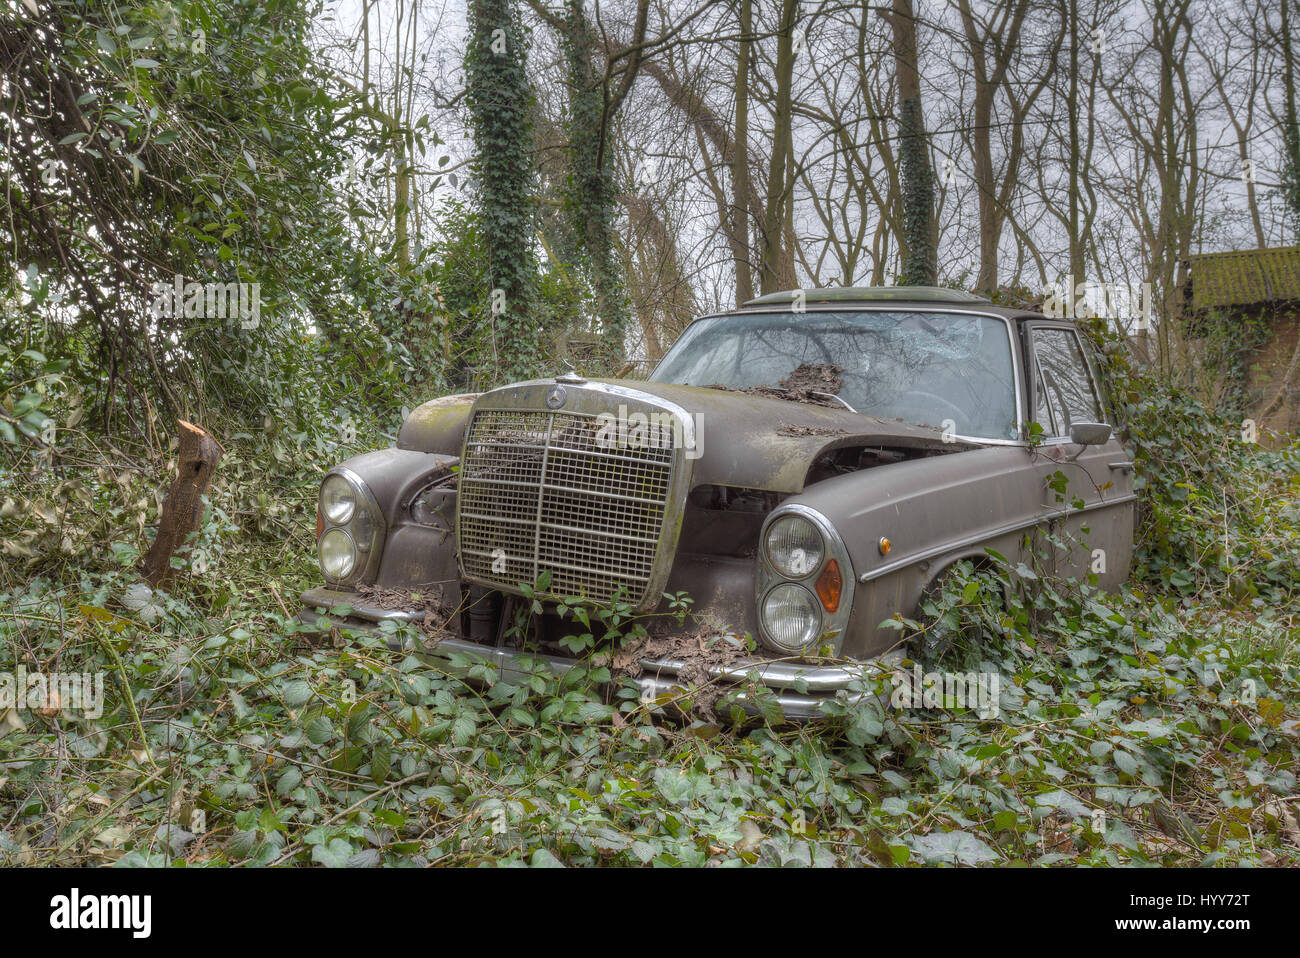 A Mercedes Benz. STUNNING images reveal the vulnerable beauty of abandoned cars that have been left to rust over the years. The collection of spectacular images show how a Volkswagen Beetle, Citroën C2 and even a Ferrari have been taken over by nature and piles of rubble. In other shots, a Mercedes Benz is overgrown with ivy and an old-fashioned BMW has been left in a garage with a collapsing roof and debris on the floor. A Ford vehicle has also been forgotten in the woods and one car even appears to have a tree growing from it. The haunting images were taken by Belgian security guard, Kenneth Stock Photo